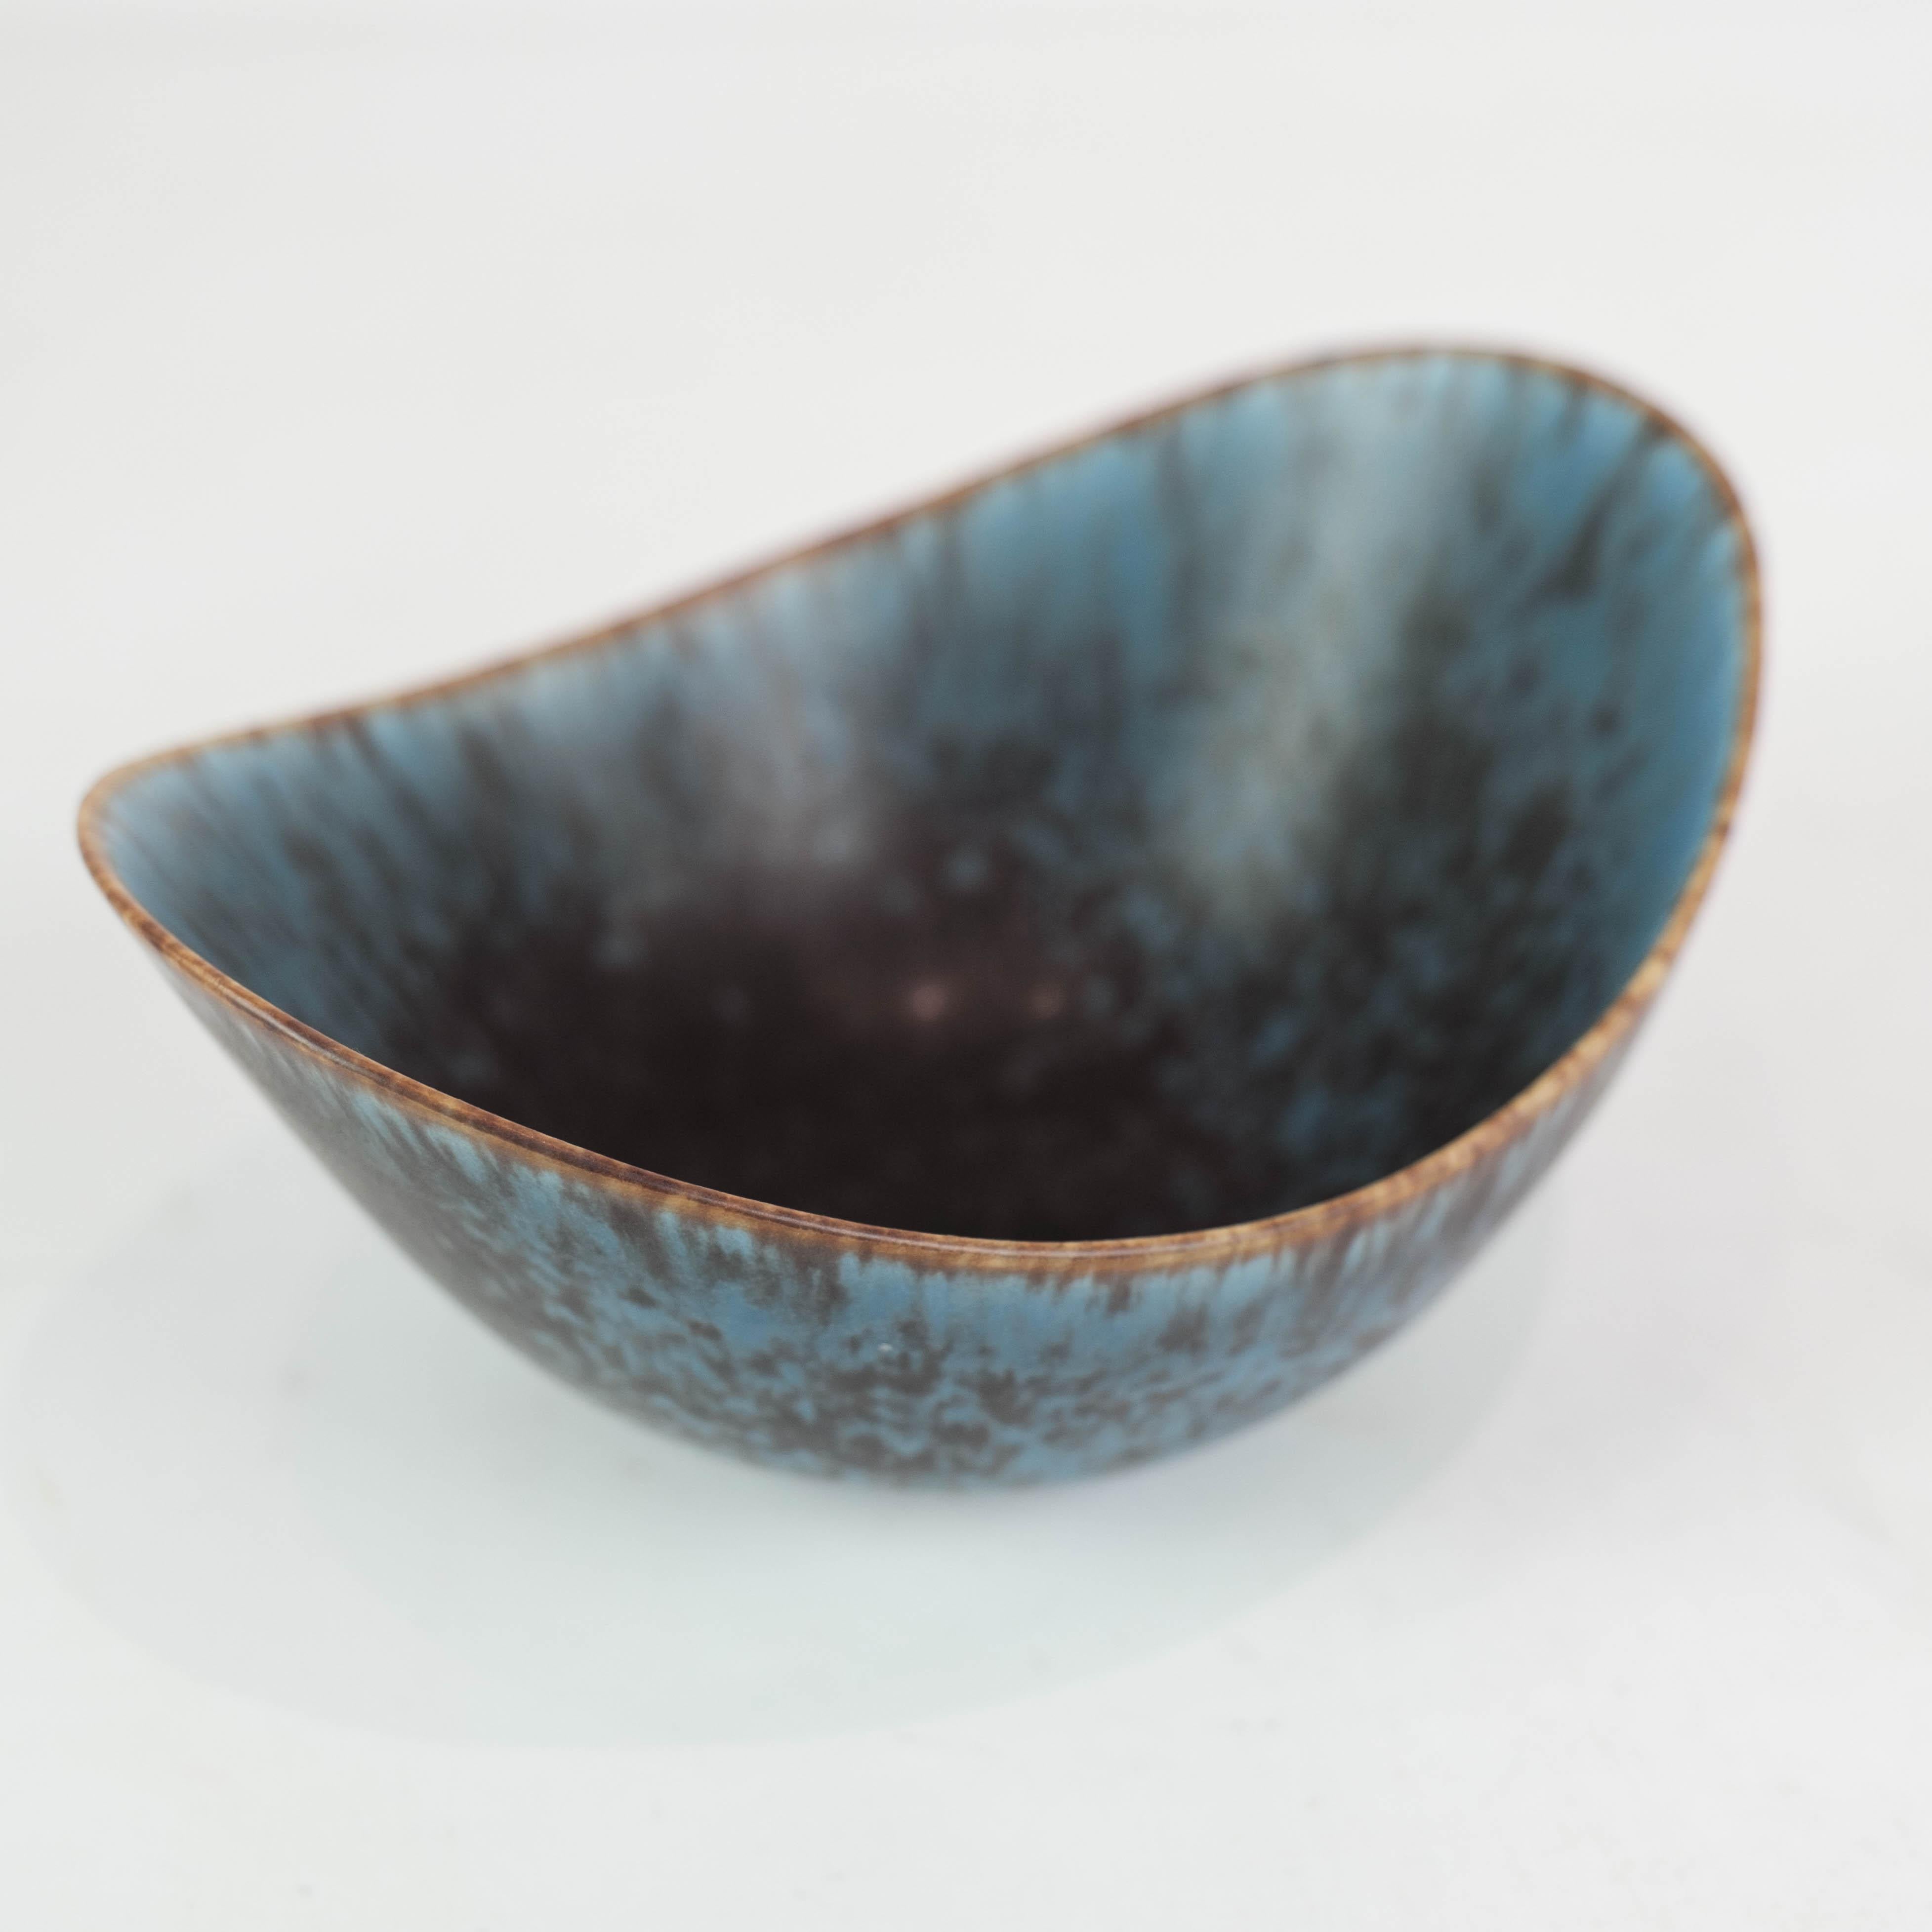 Scandinavian Modern Ceramic Bowl with Blue and Brown Glace by the Artist Gunnar Nylund for Rørstrand